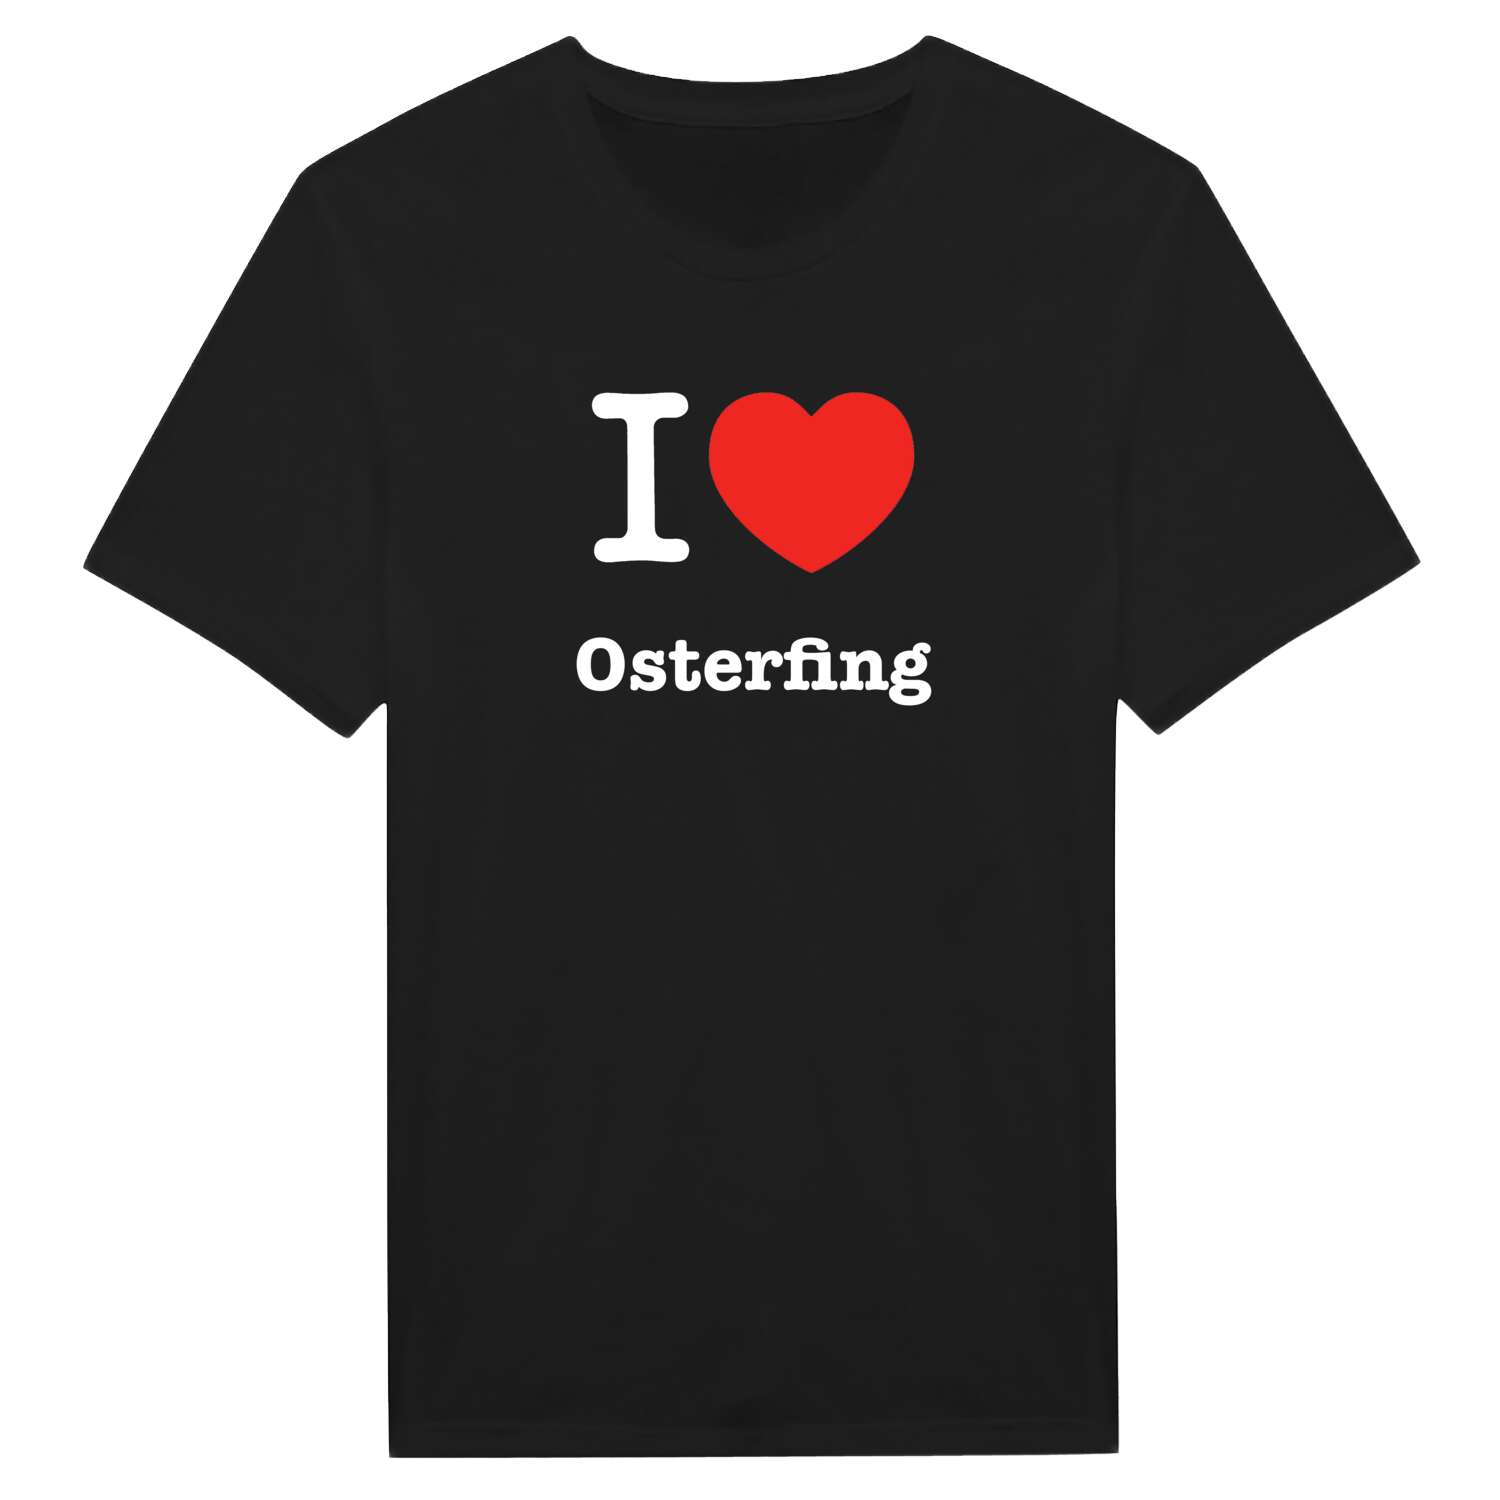 Osterfing T-Shirt »I love«